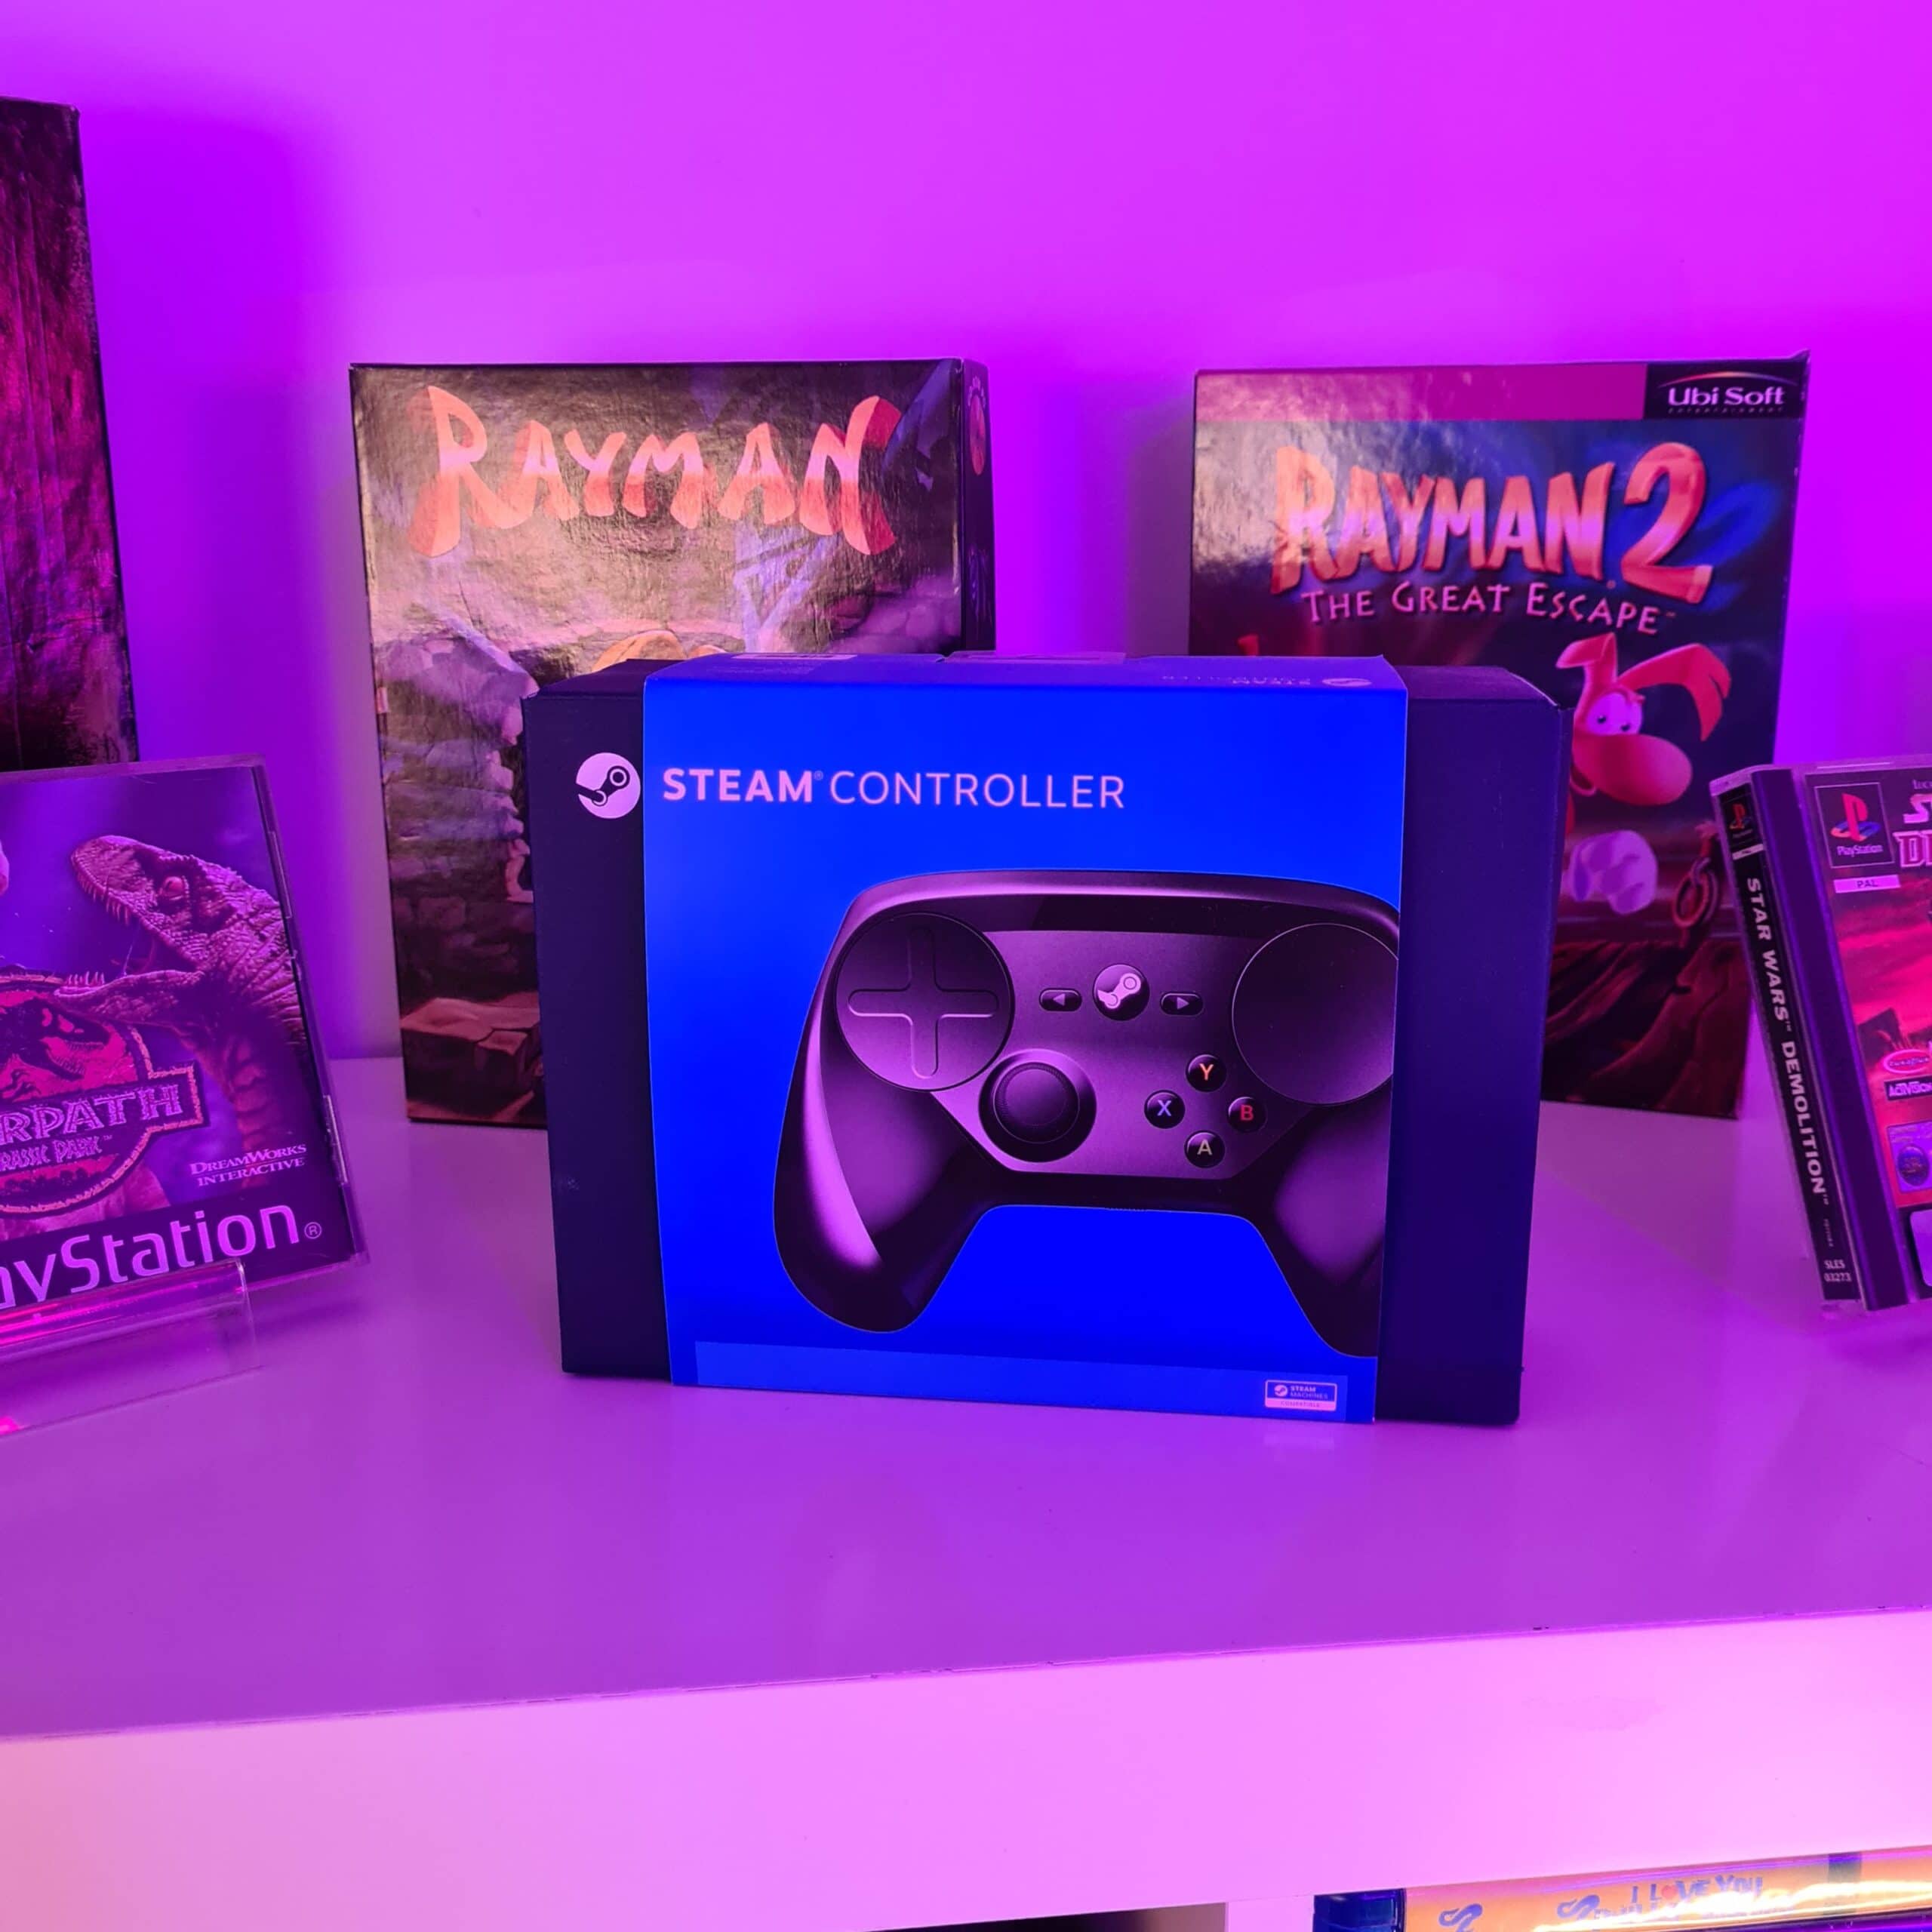 Steam controller product packages on table